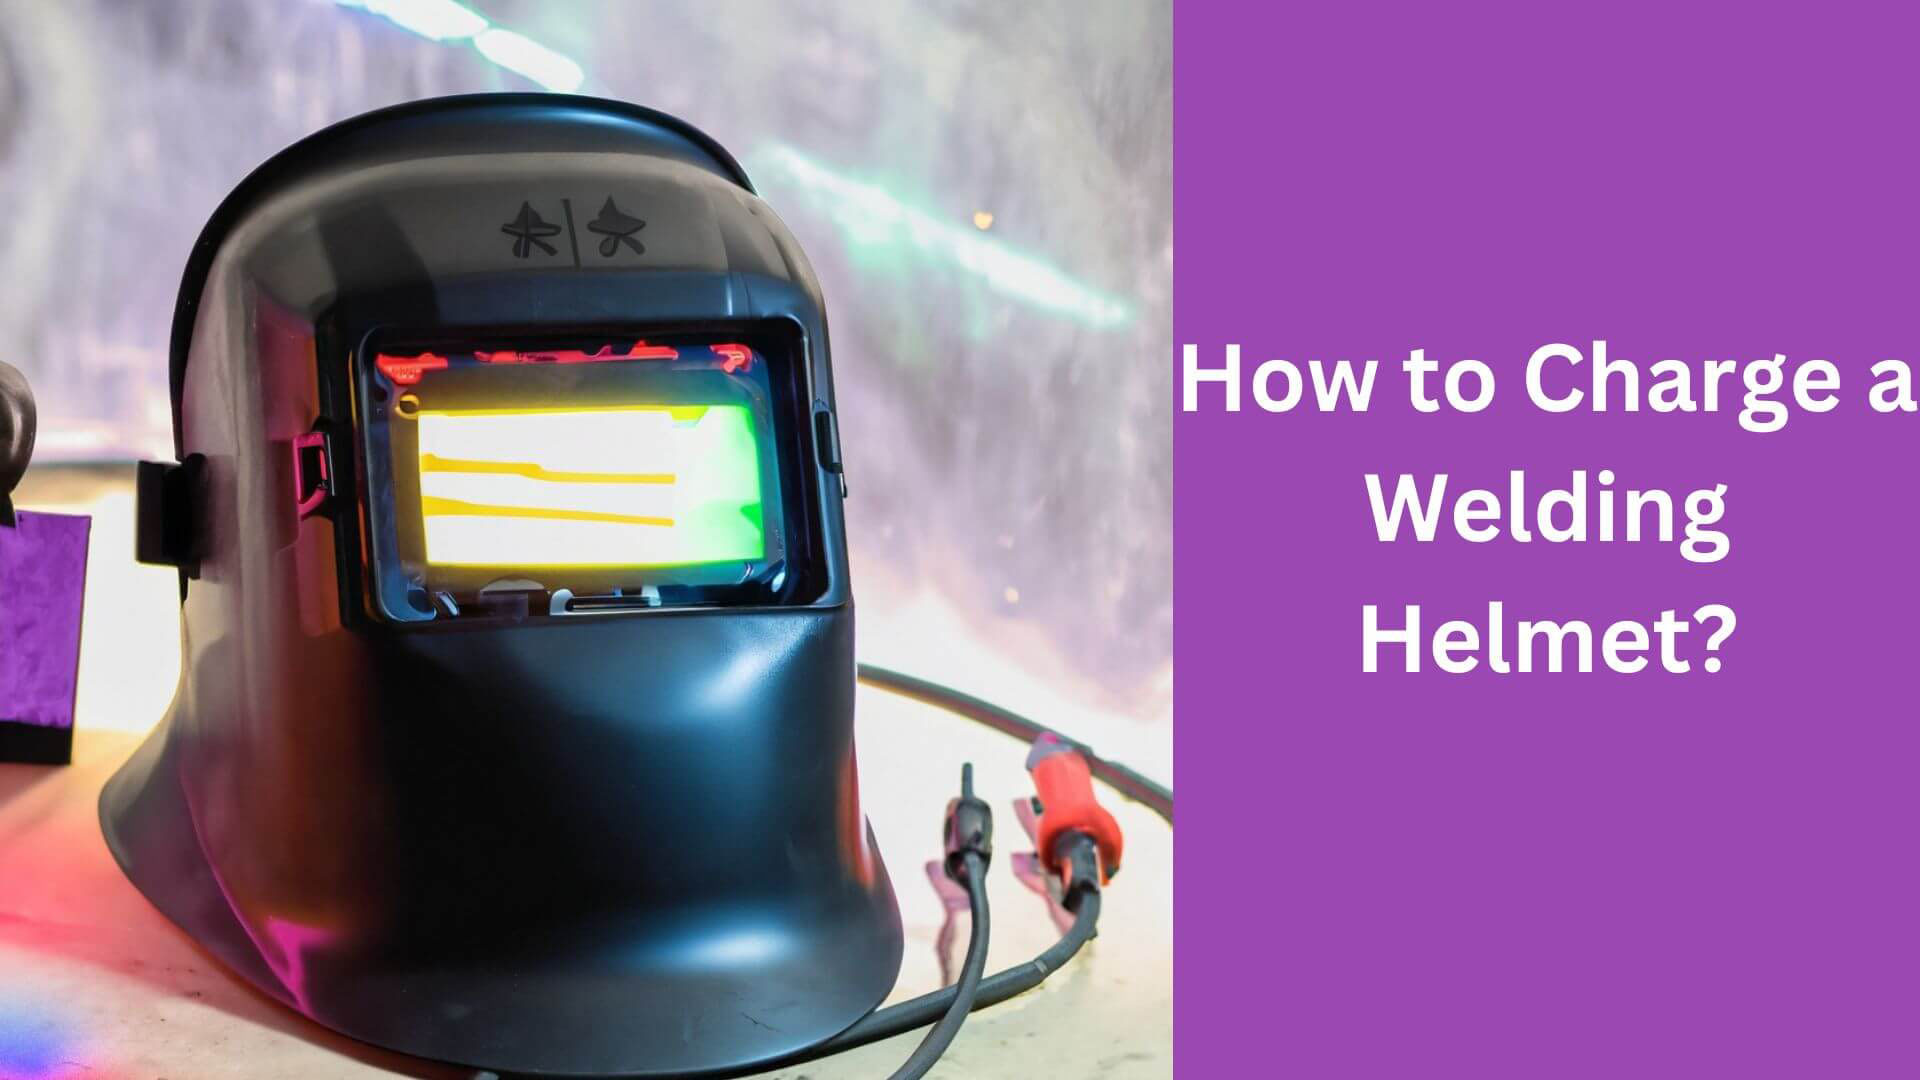 How to Charge a Welding Helmet?